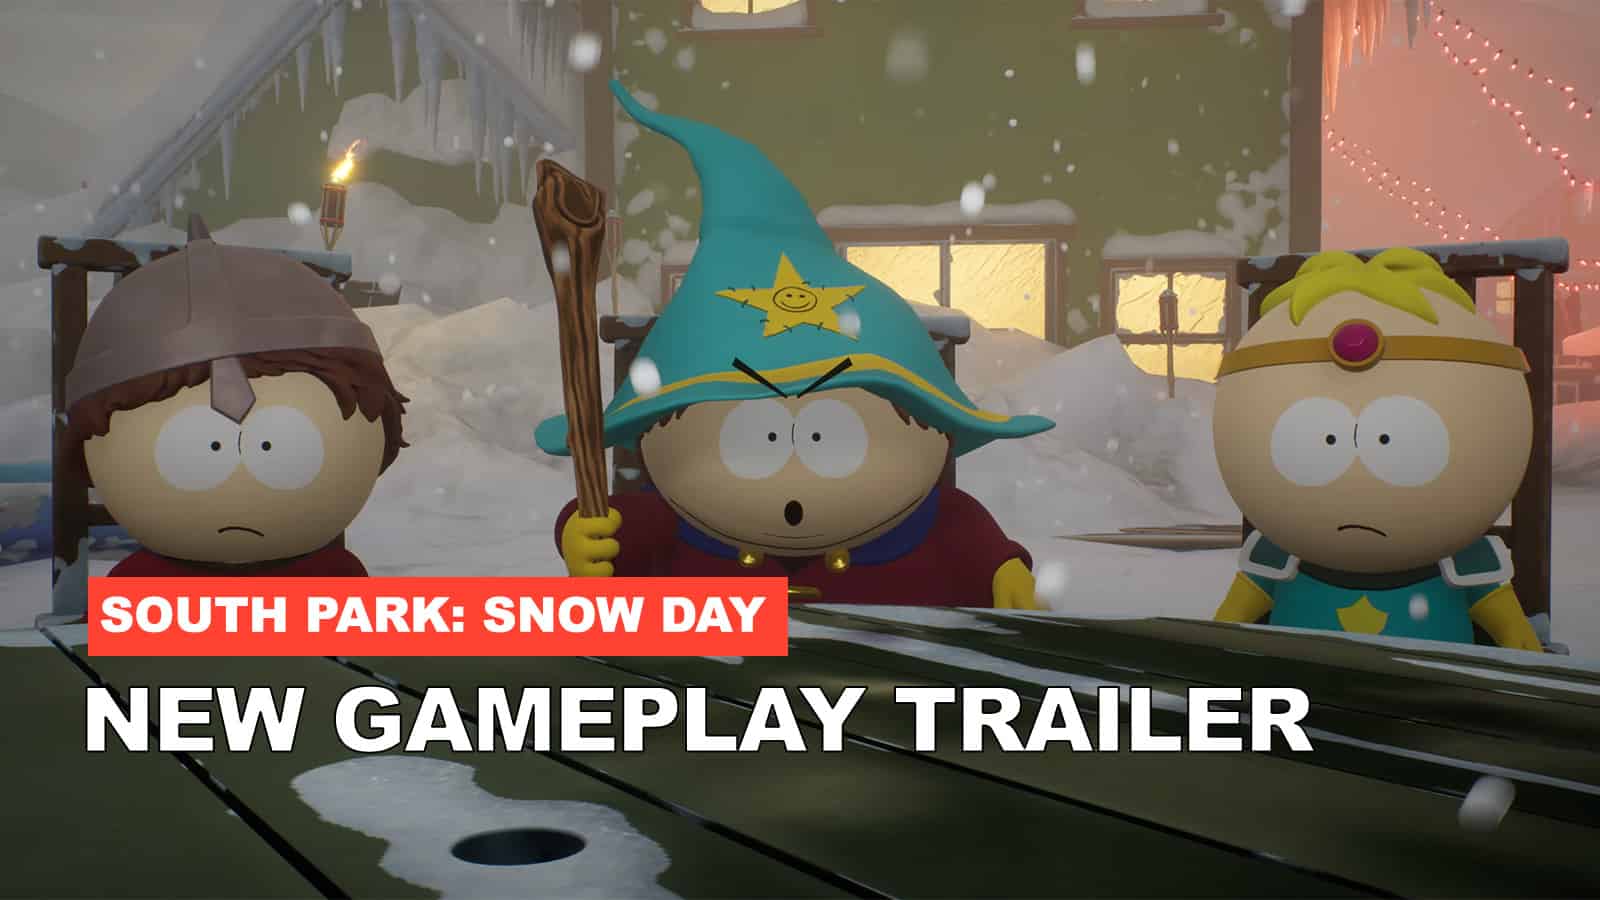 Take A Look At New South Park: Snow Day Gameplay